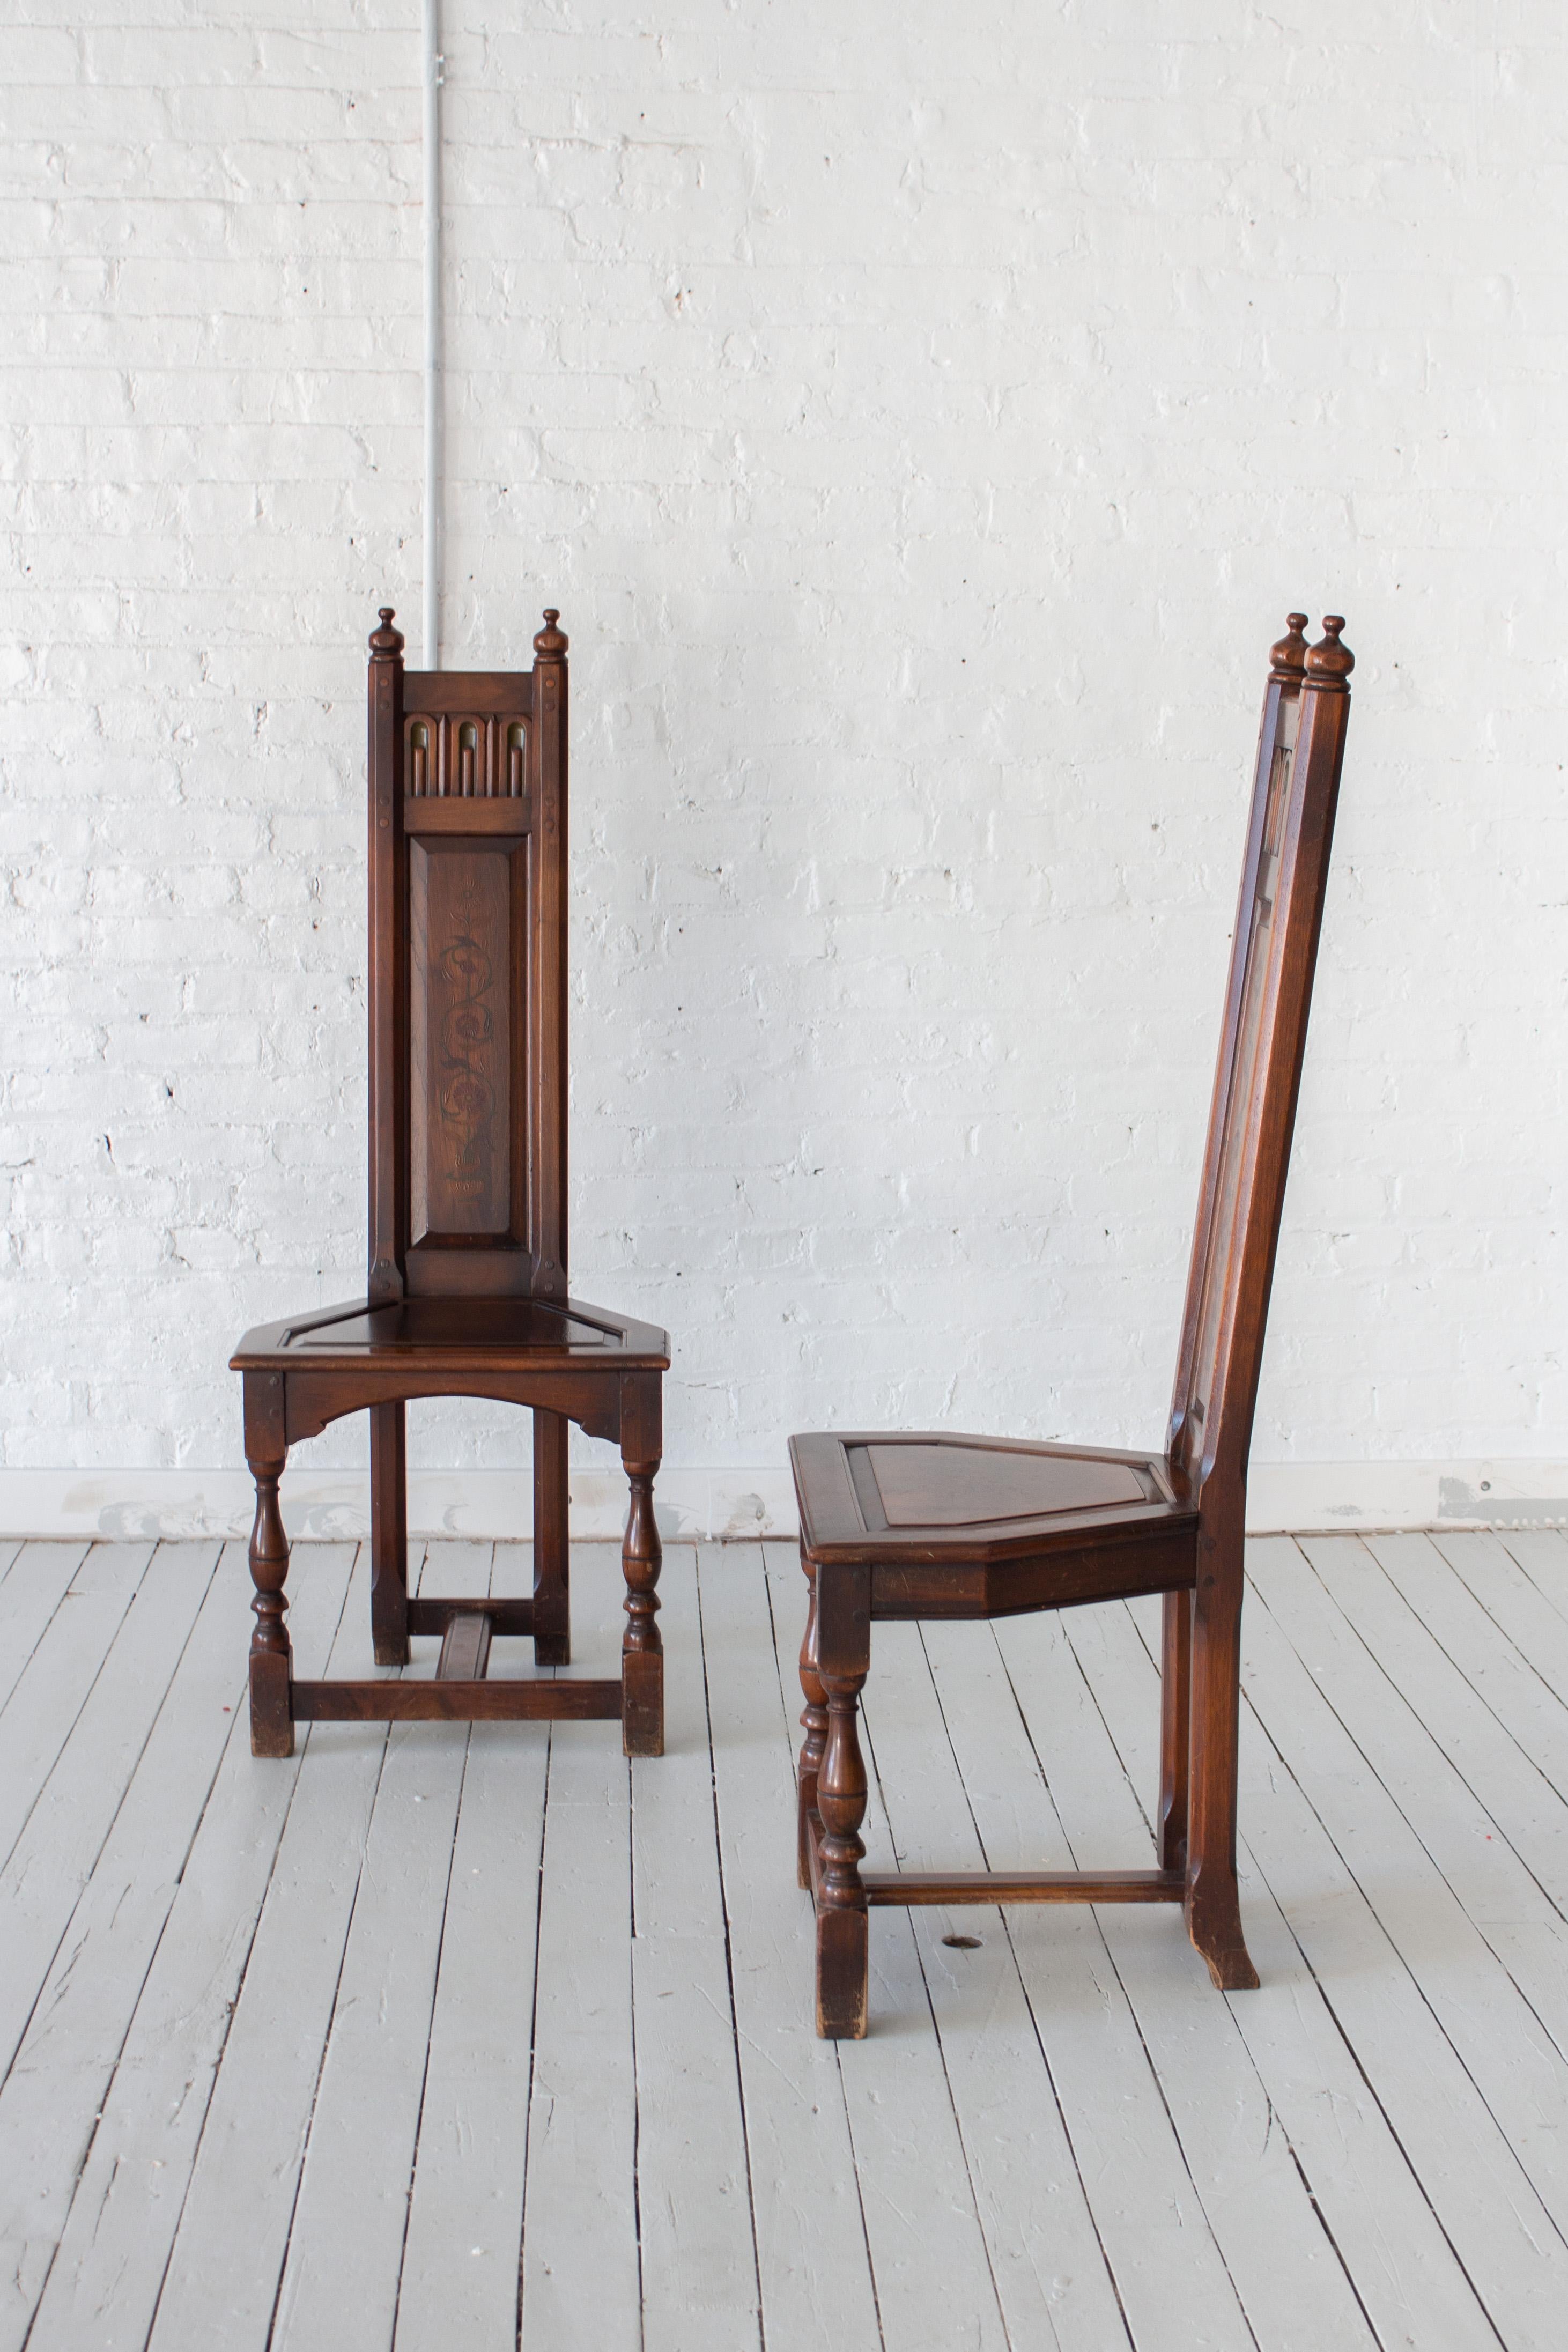 American Pair of Gothic Revival Decorated Wooden Chairs by Kittinger For Sale